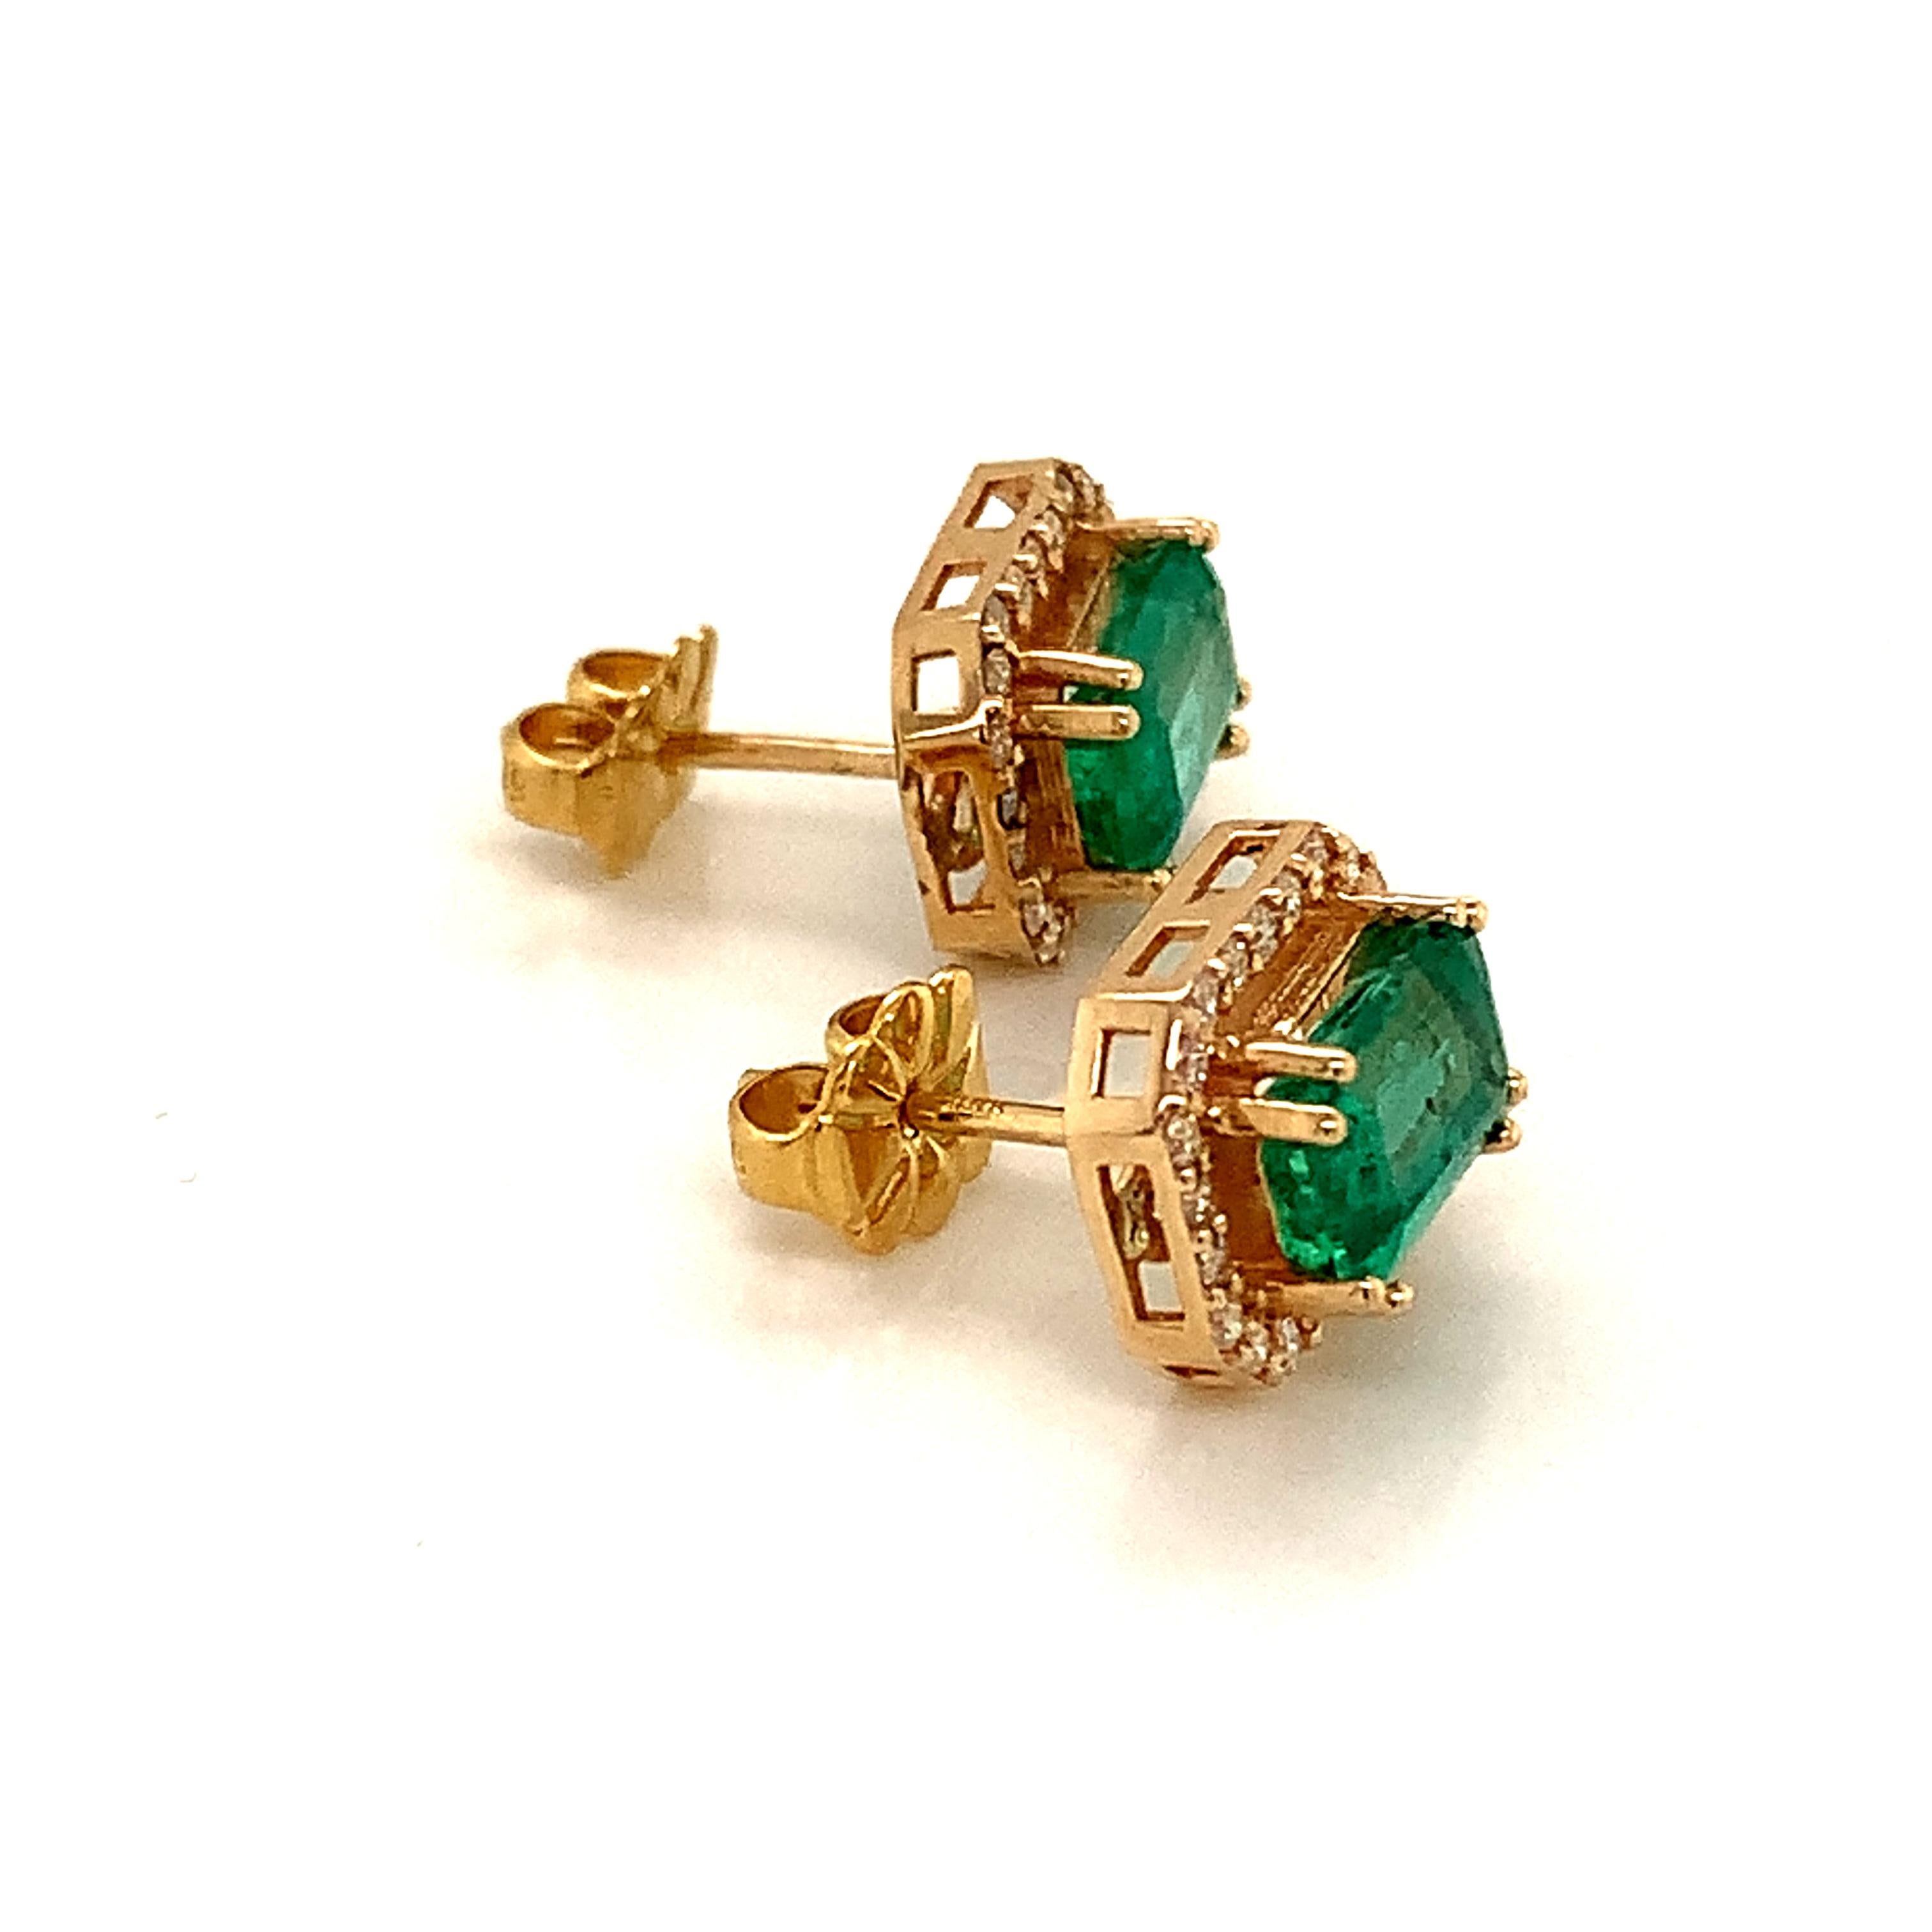 Natural Finely Faceted Quality Emerald Diamond Earrings 14k Gold 1.85 TCW Certified $3,950 111884

This is a Unique Custom Made Glamorous Piece of Jewelry!

Nothing says, “I Love you” more than Diamonds and Pearls!

These Emerald earrings have been